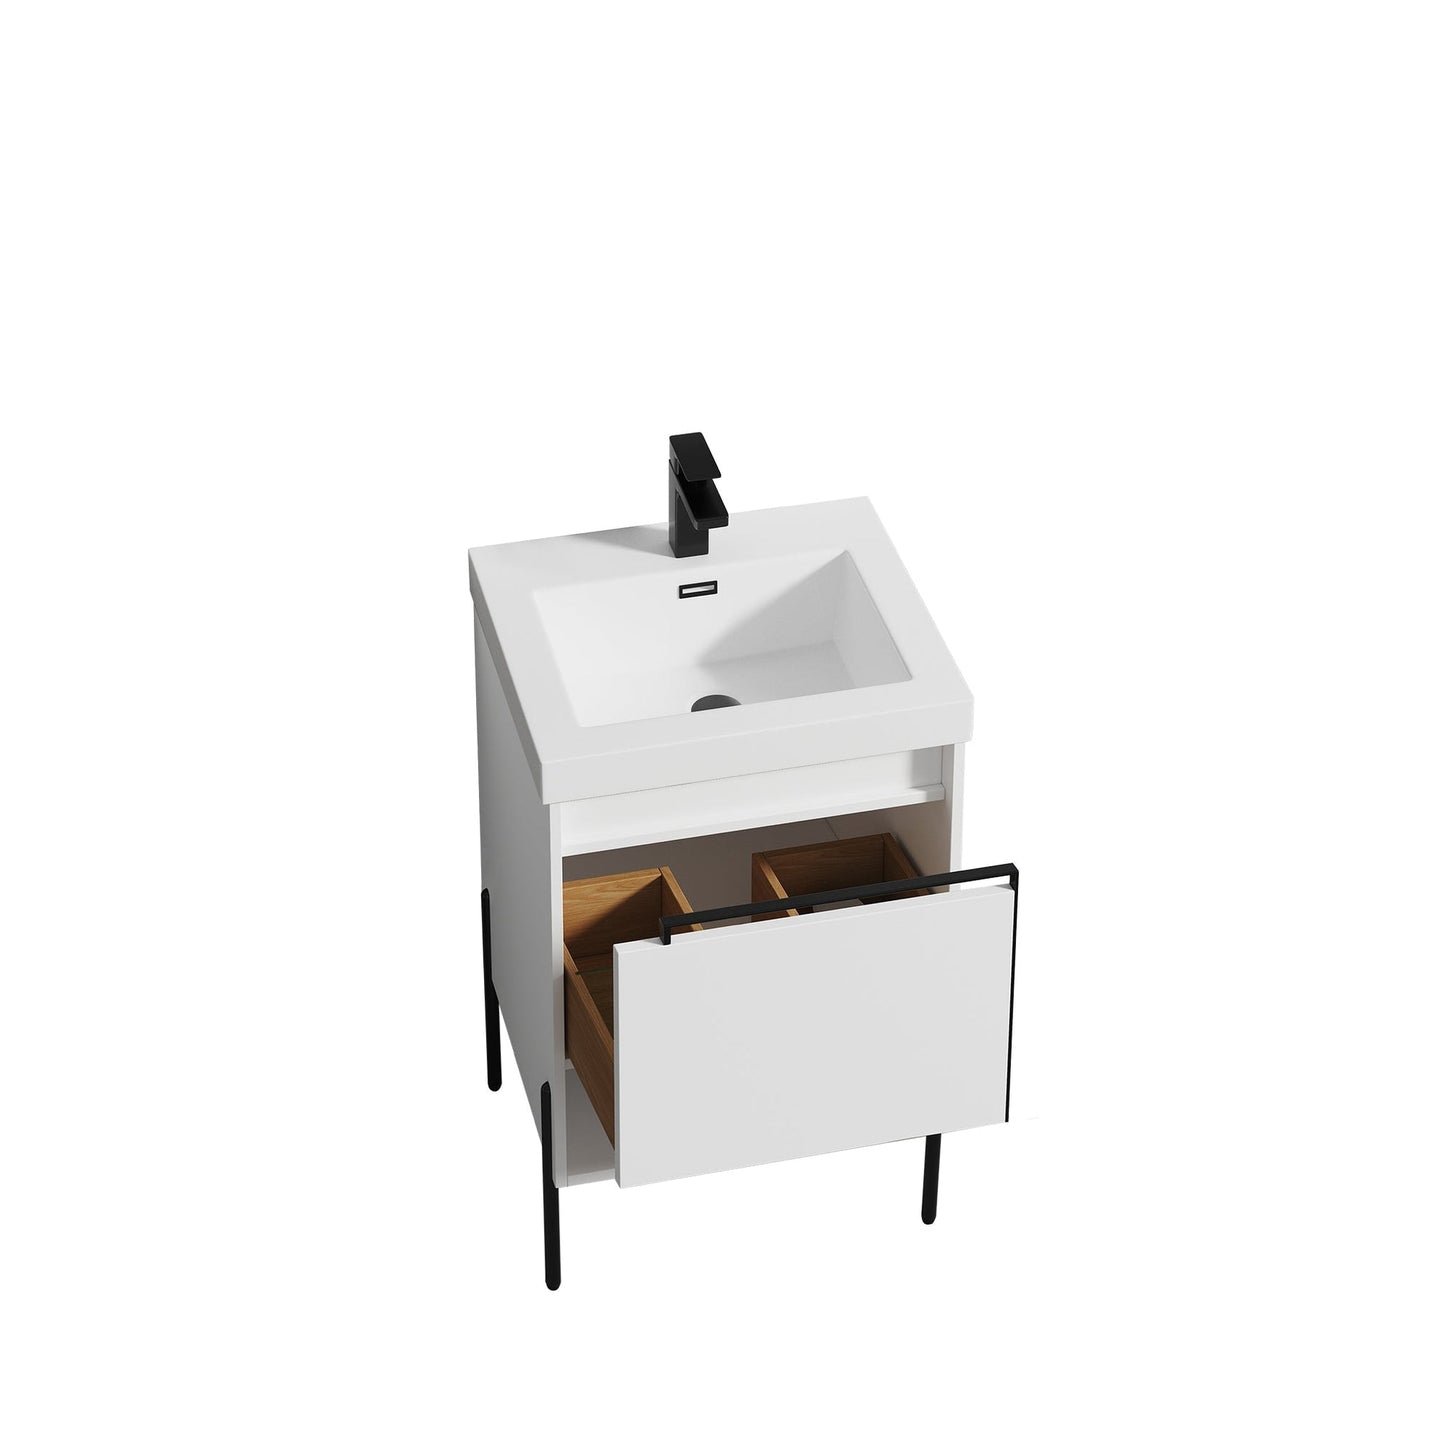 Blossom Turin 20" 1-Drawer Matte White Freestanding Single Vanity Base With Open Shelf, Handle and Legs